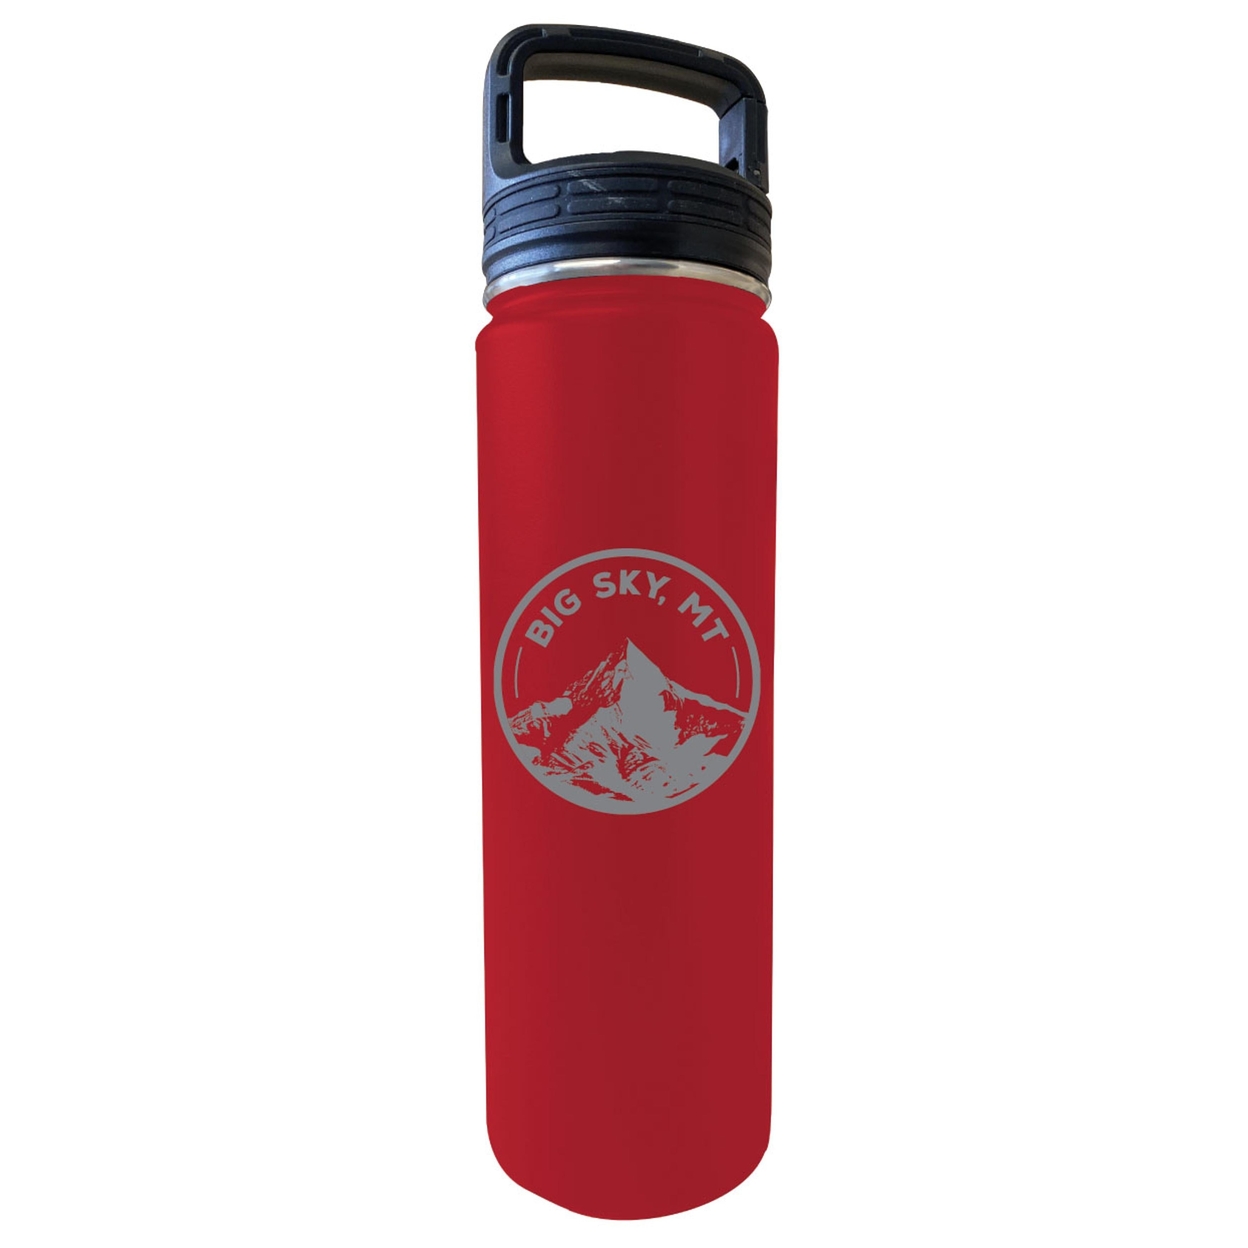 Big Sky Montana Souvenir 32 Oz Engraved Insulated Stainless Steel Tumbler - Red,,4-Pack